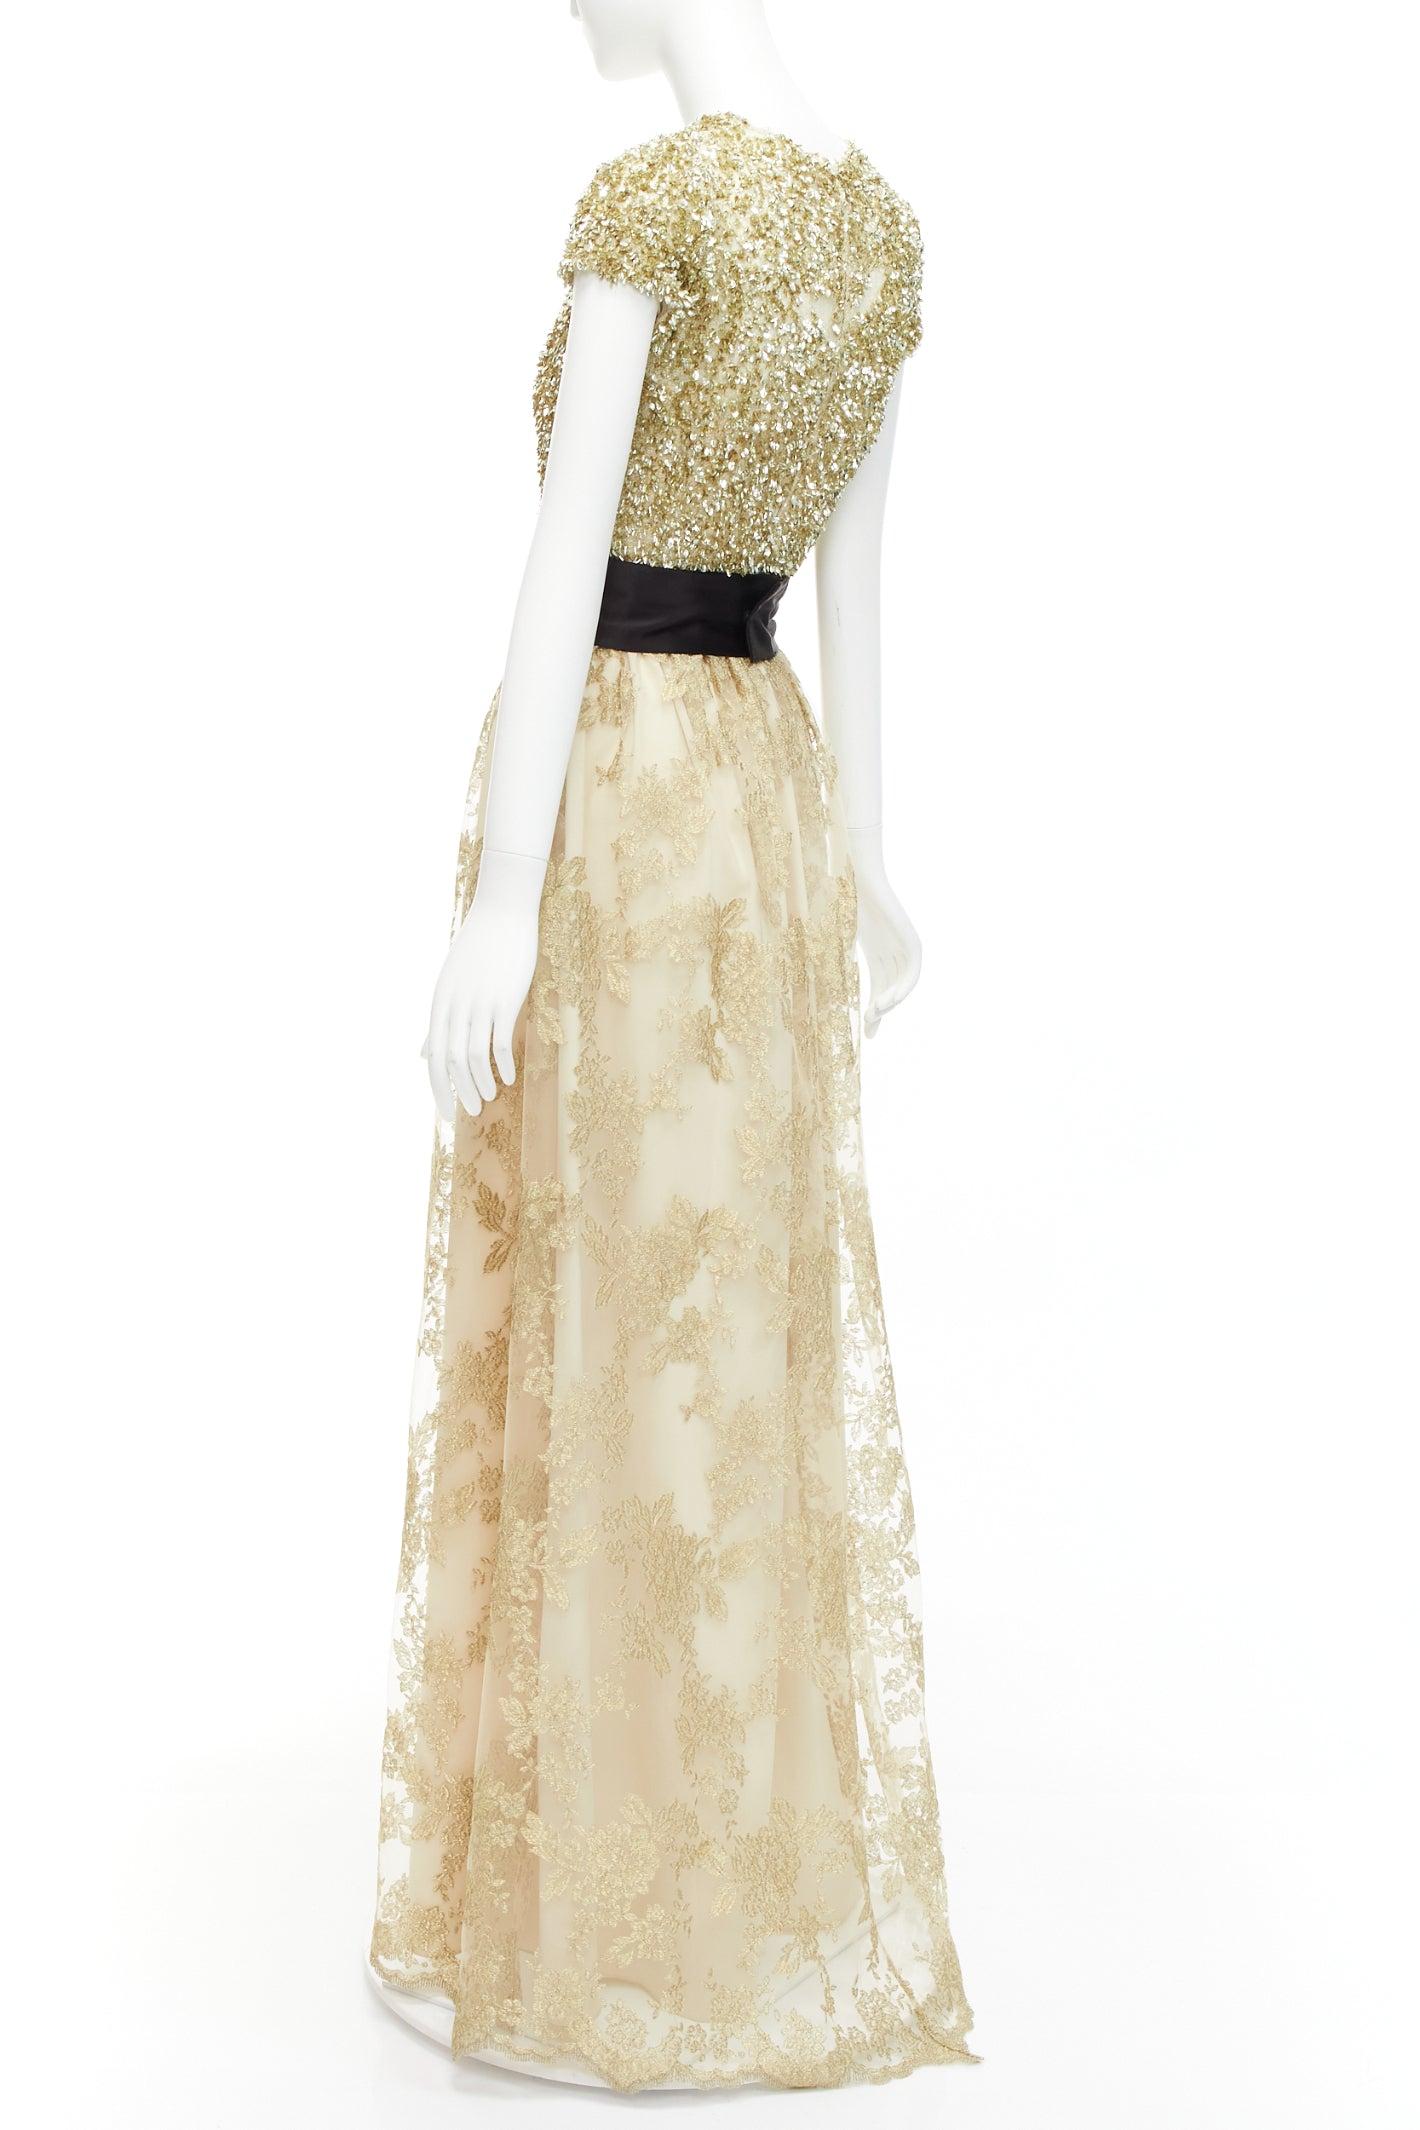 BADGLEY MISCHKA gold sequins top floral lace overlay belted gown dress US6 M For Sale 2